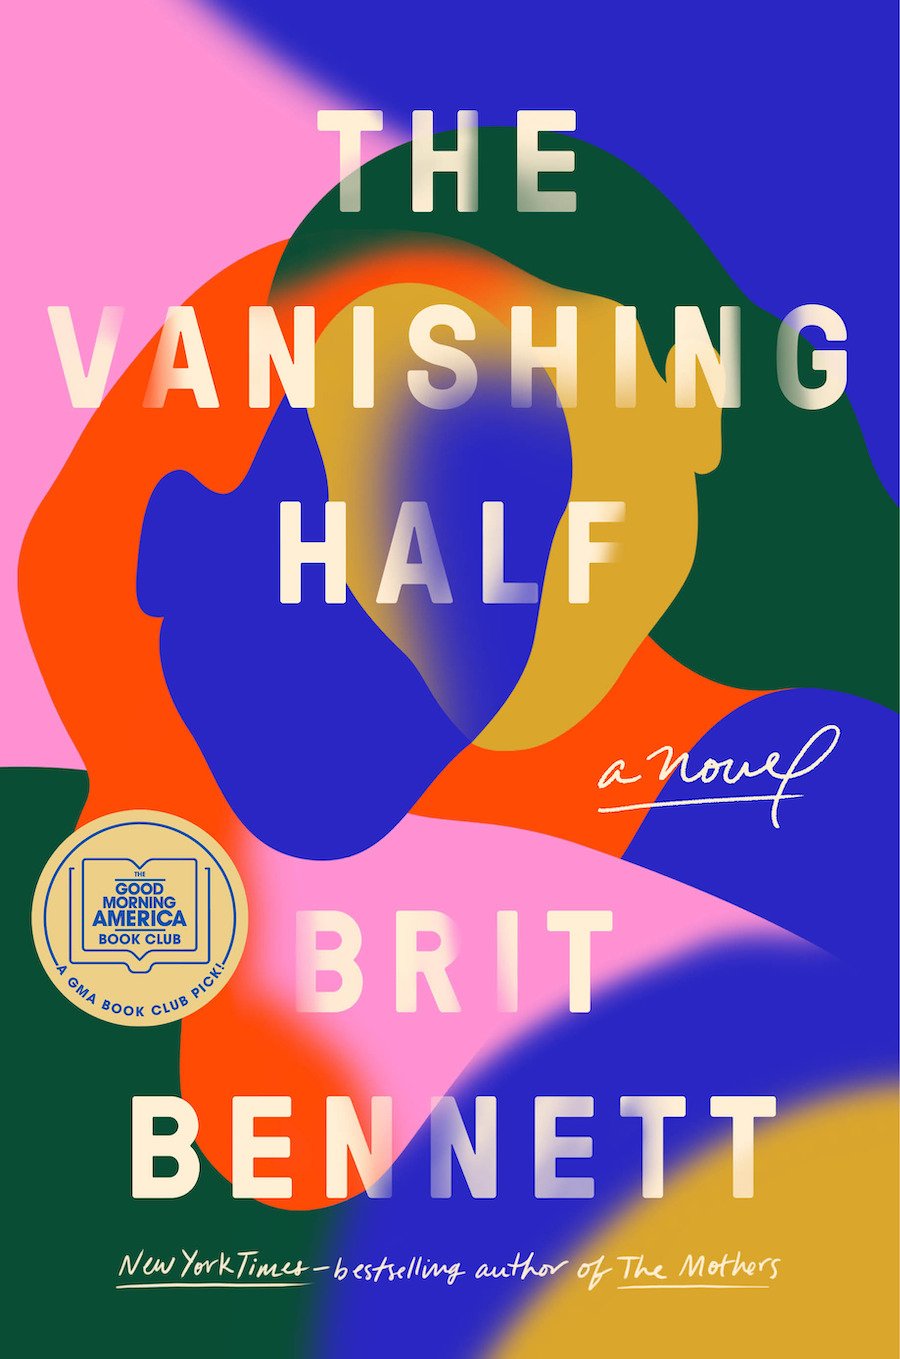 The book cover for The Vanishing Half